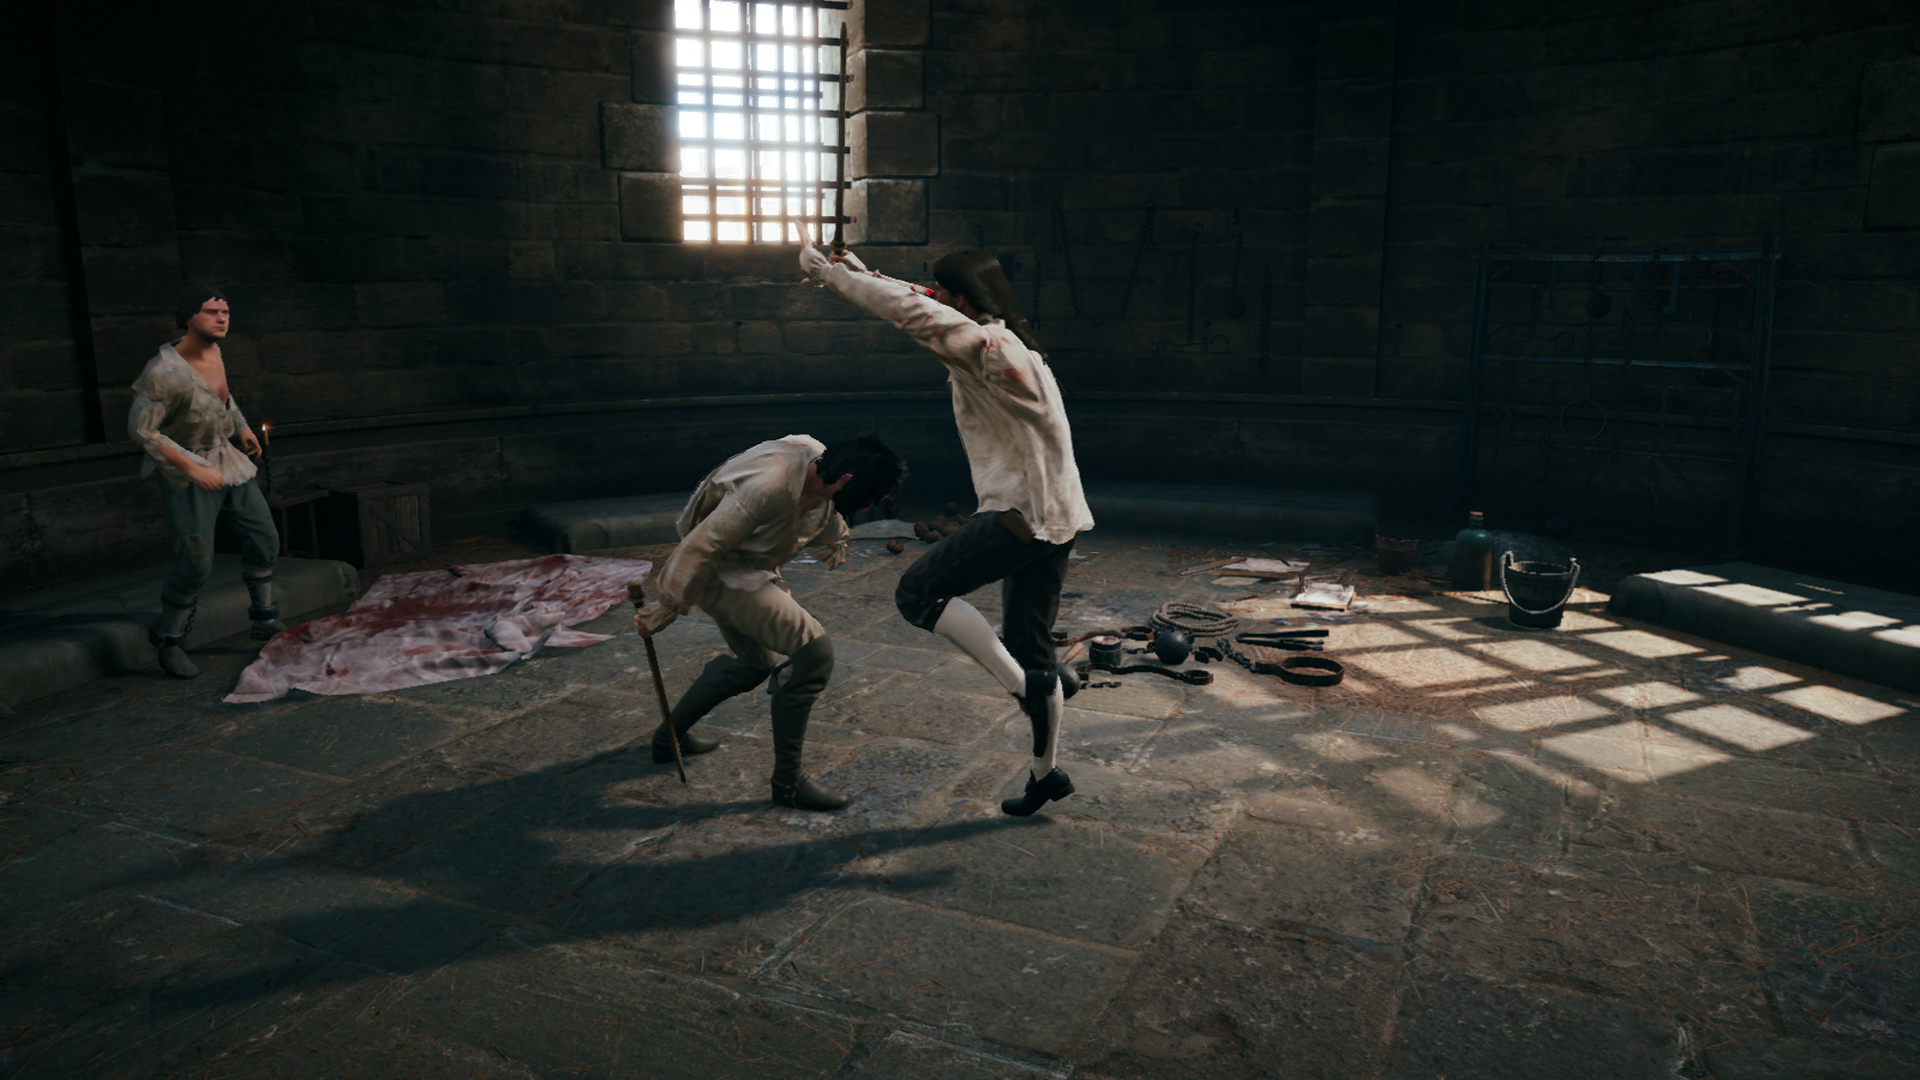 1487428824-assassin-s-creed-r-unity-20170218141643.png